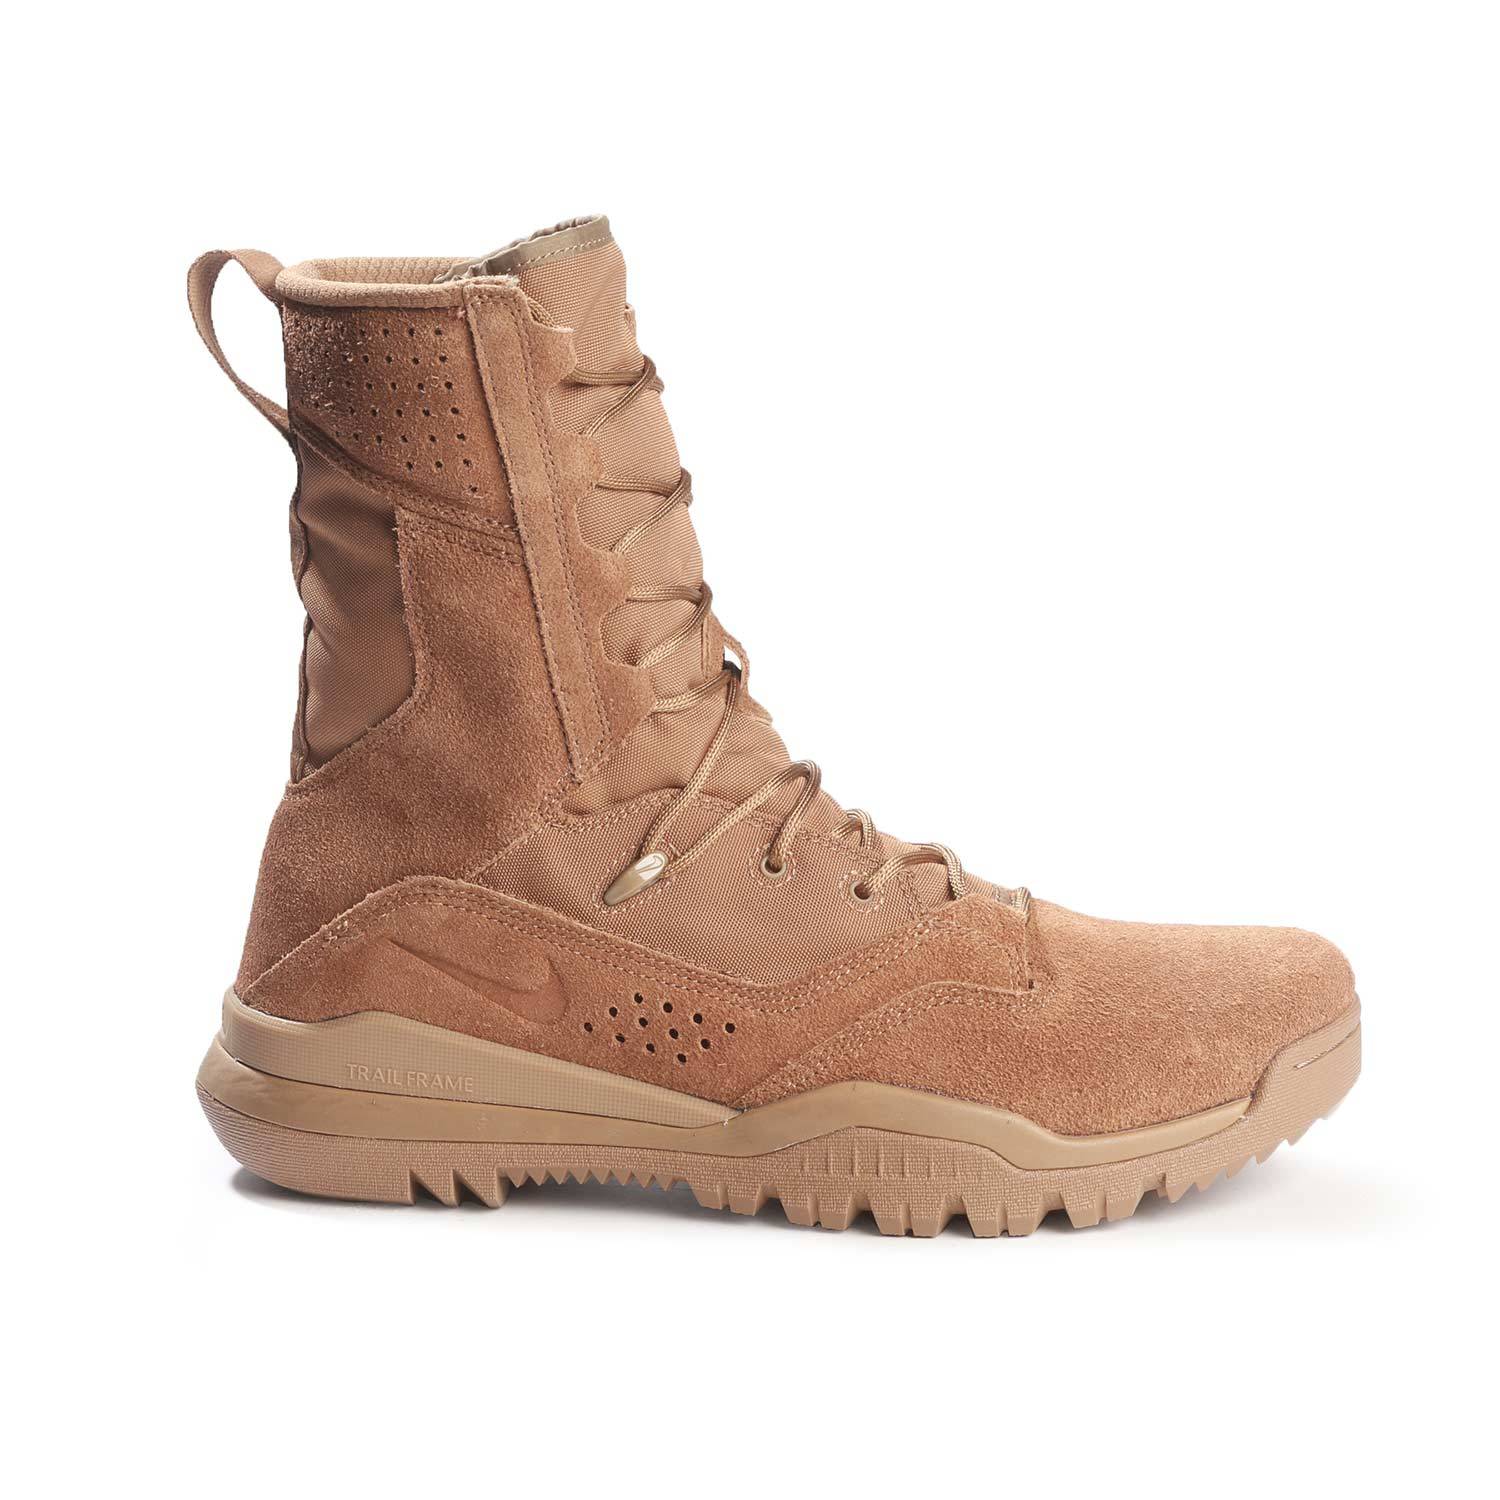 Nike SFB Field 2 8" Tactical Boot